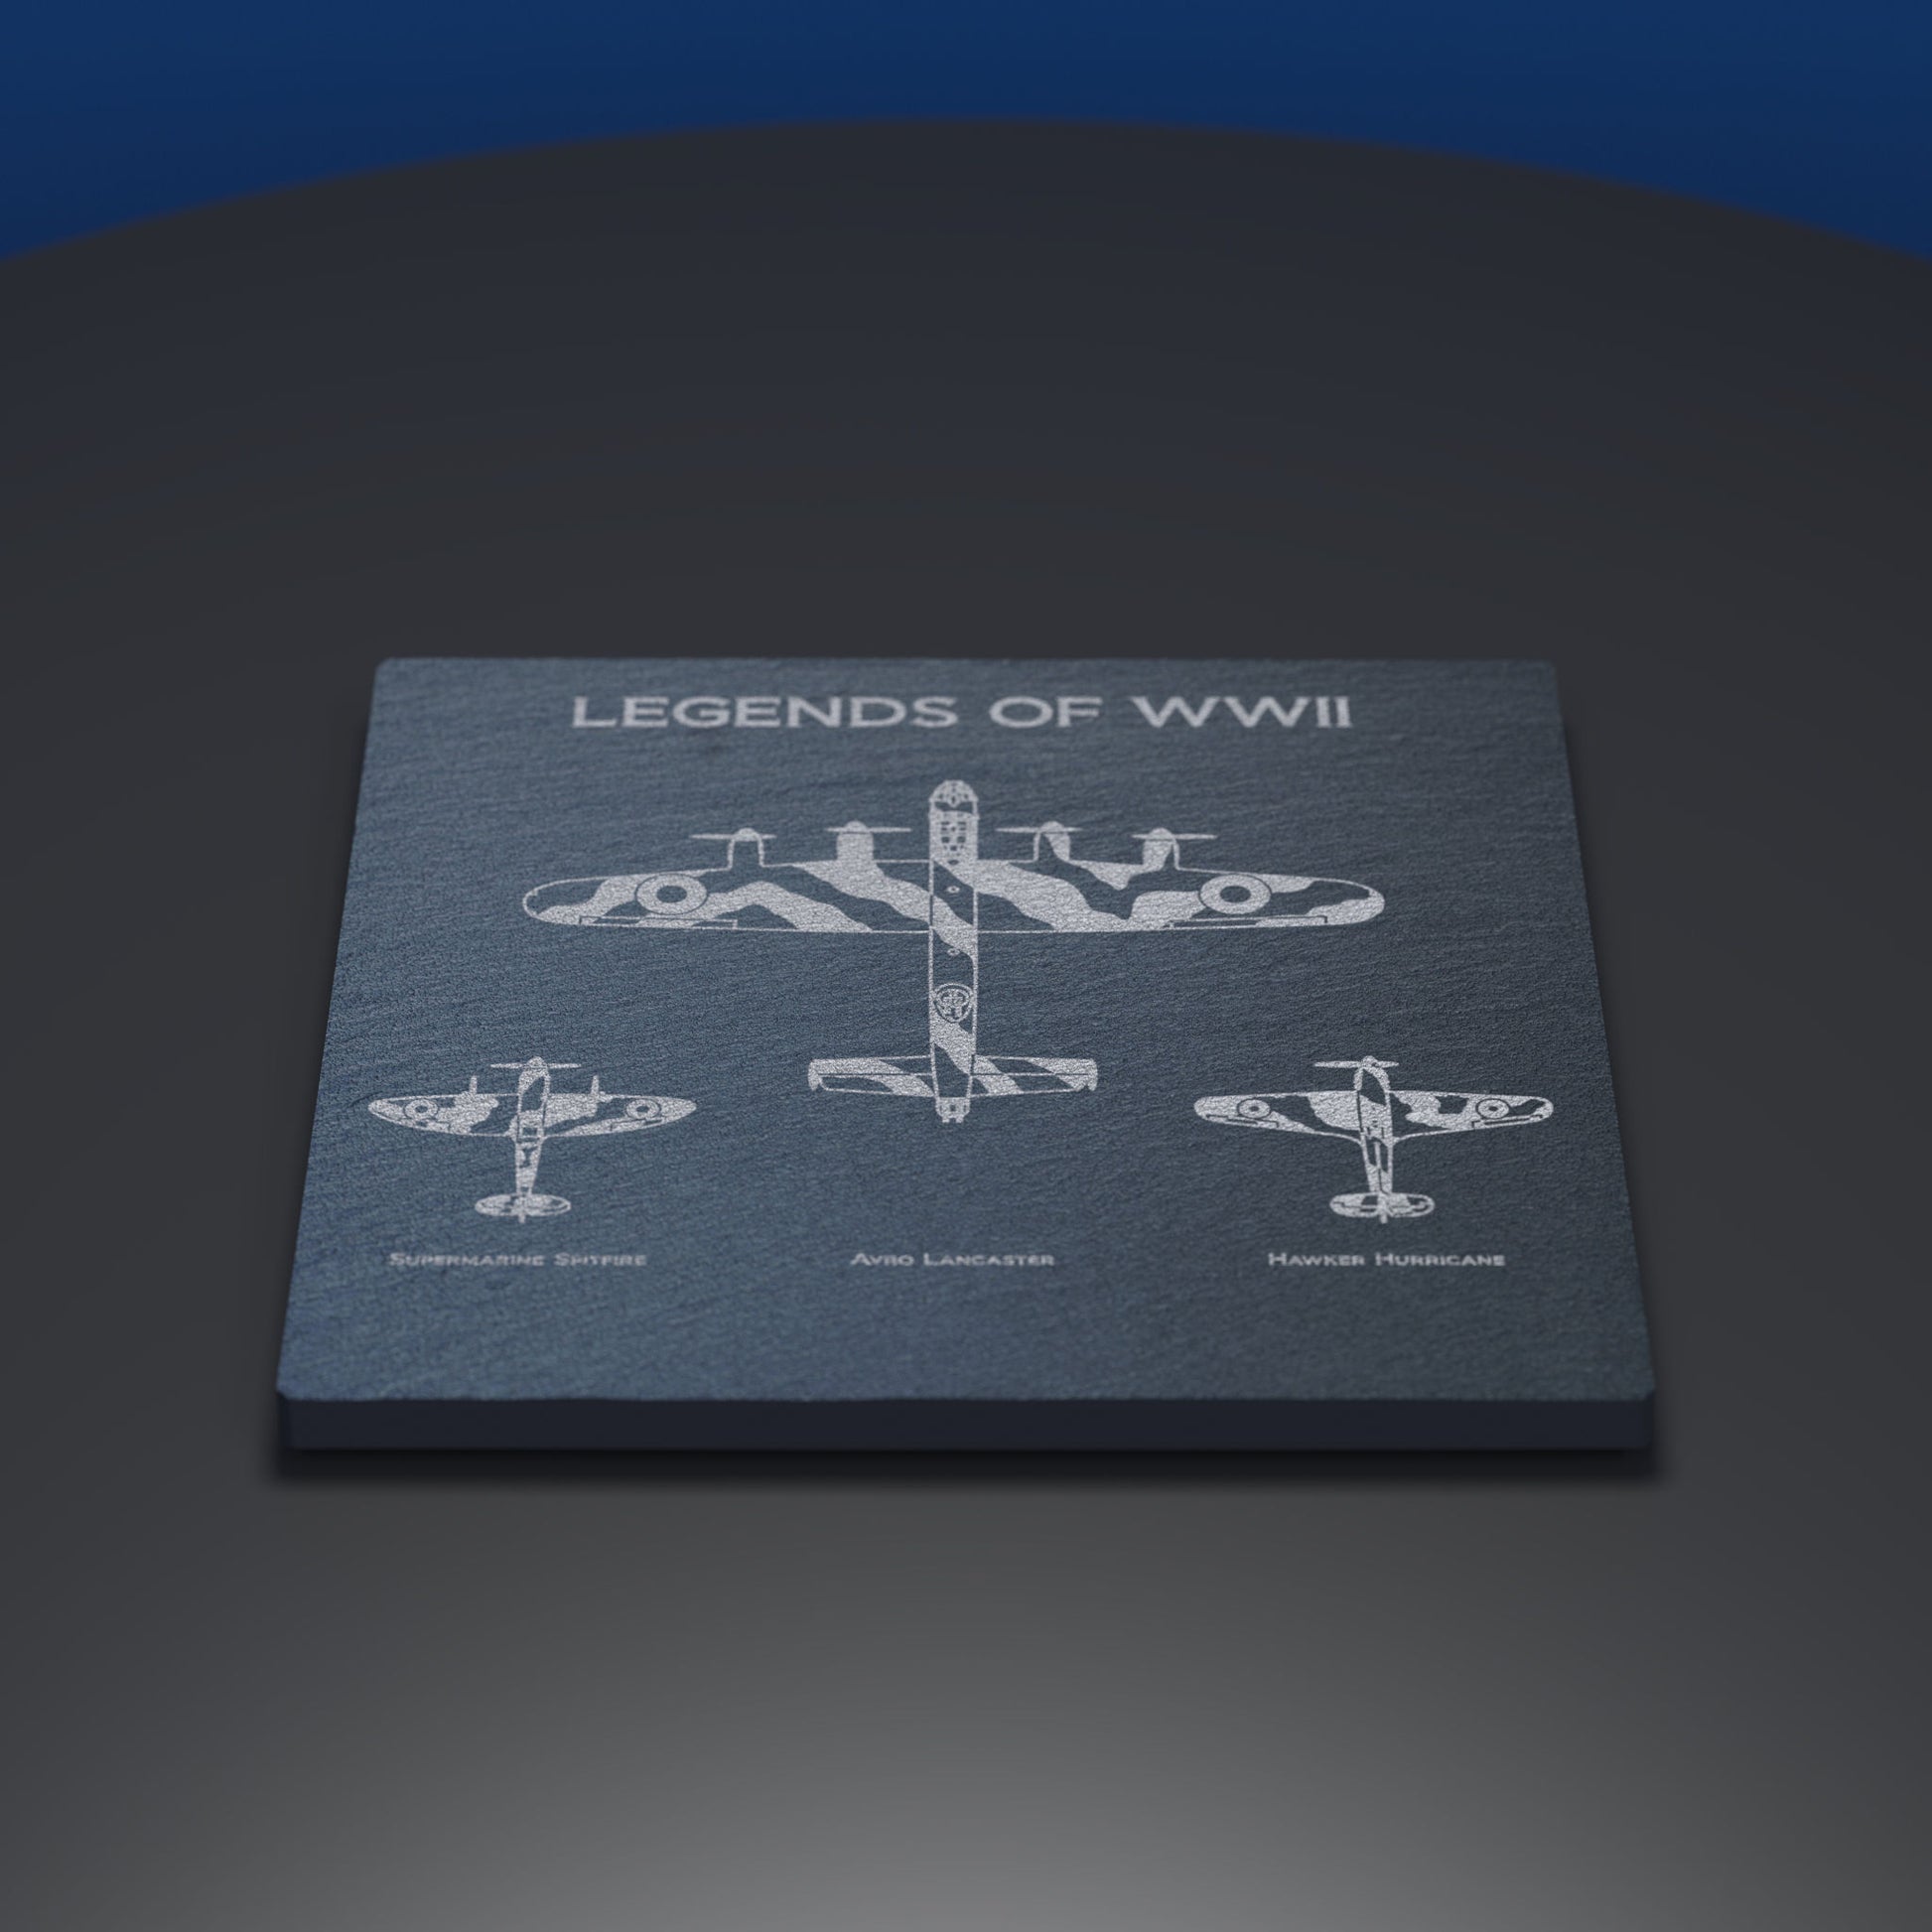 Slate coaster engraved with Legends of WW2, including the Lancaster, Spitfire and Hurricane